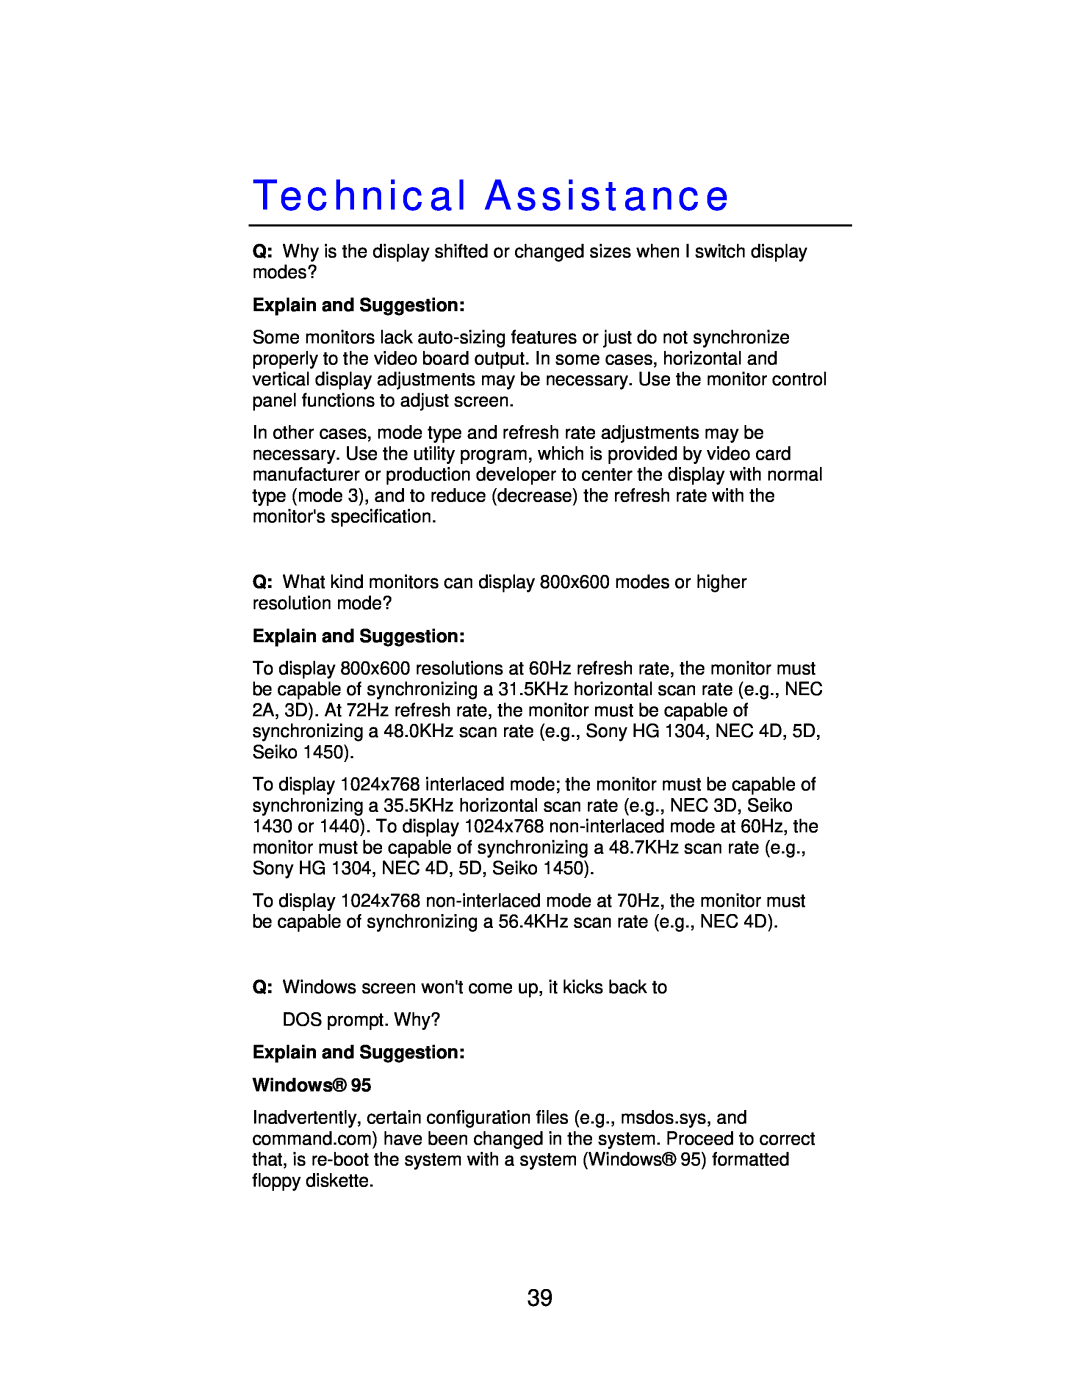 Jaton 5200 user manual Technical Assistance, Explain and Suggestion Windows 